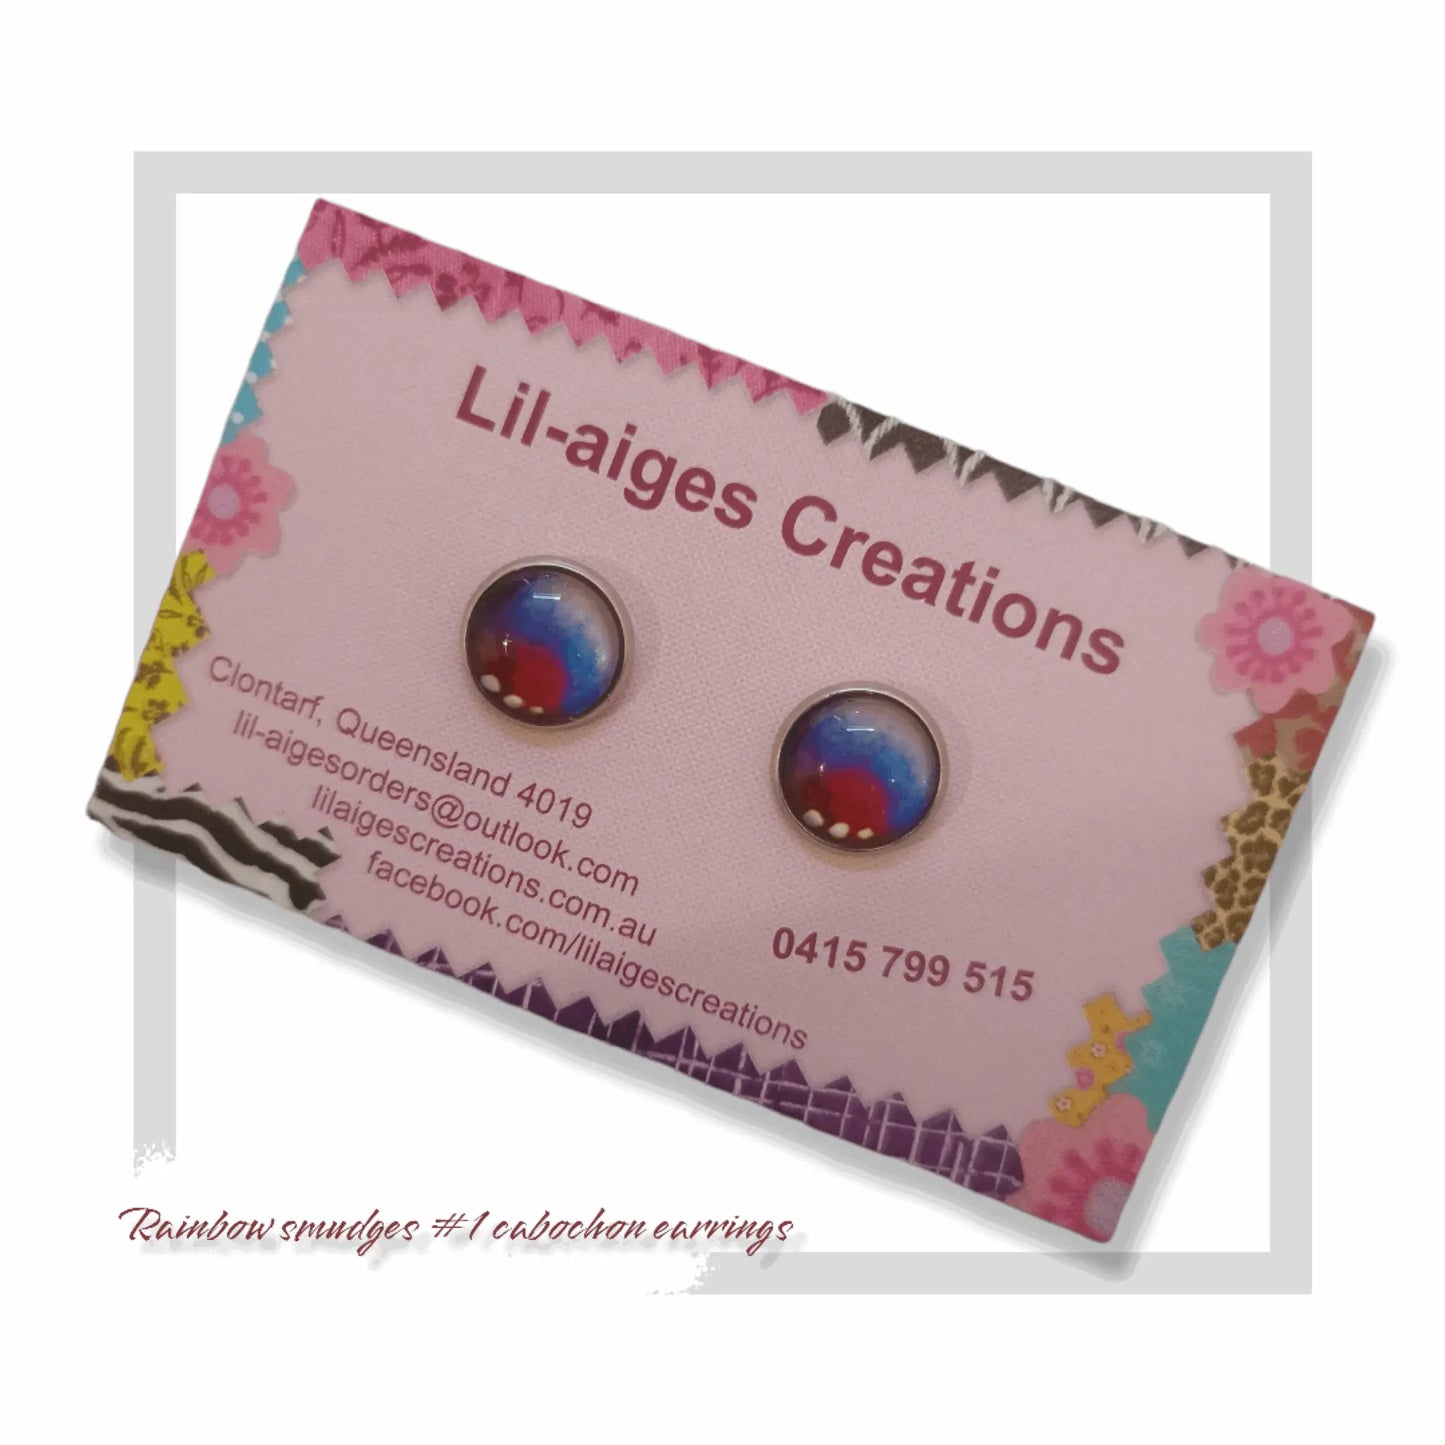 Rainbow Smudges #1 12mm Cabochon stud earrings - Lil-aiges Creations - Quality Australian-made Gifts